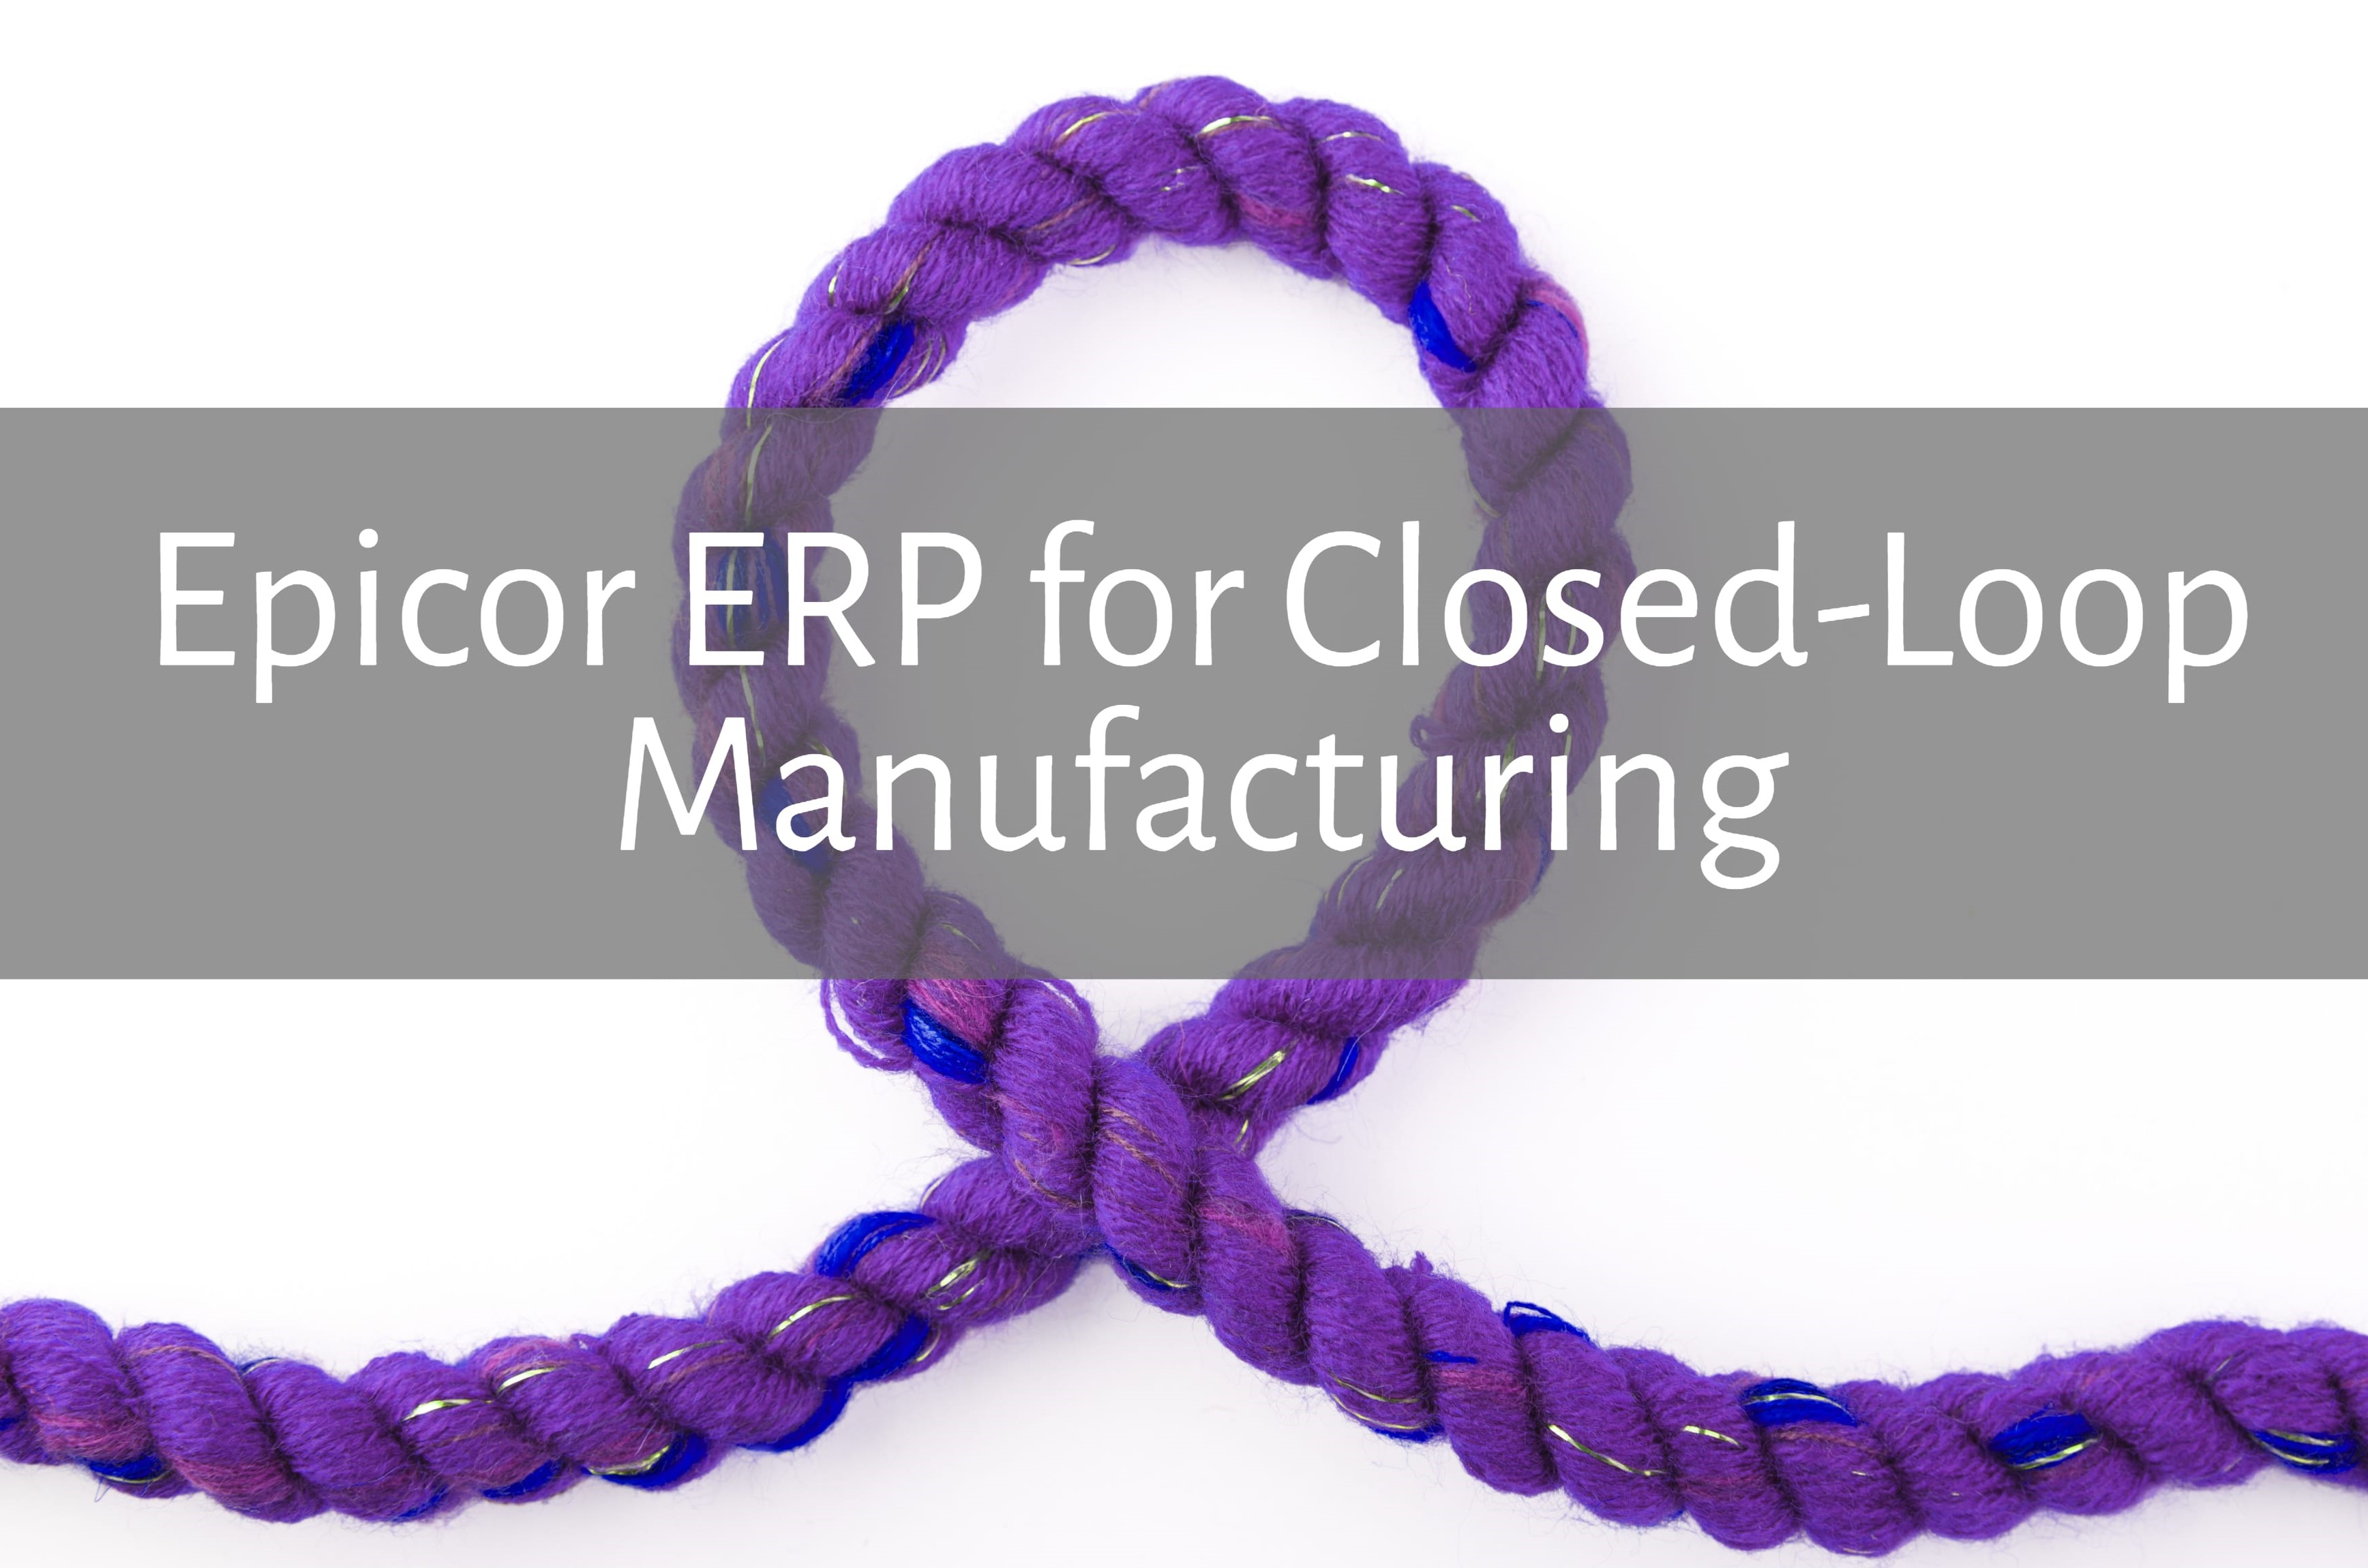 Epicor ERP Powers Closed-Loop Manufacturing